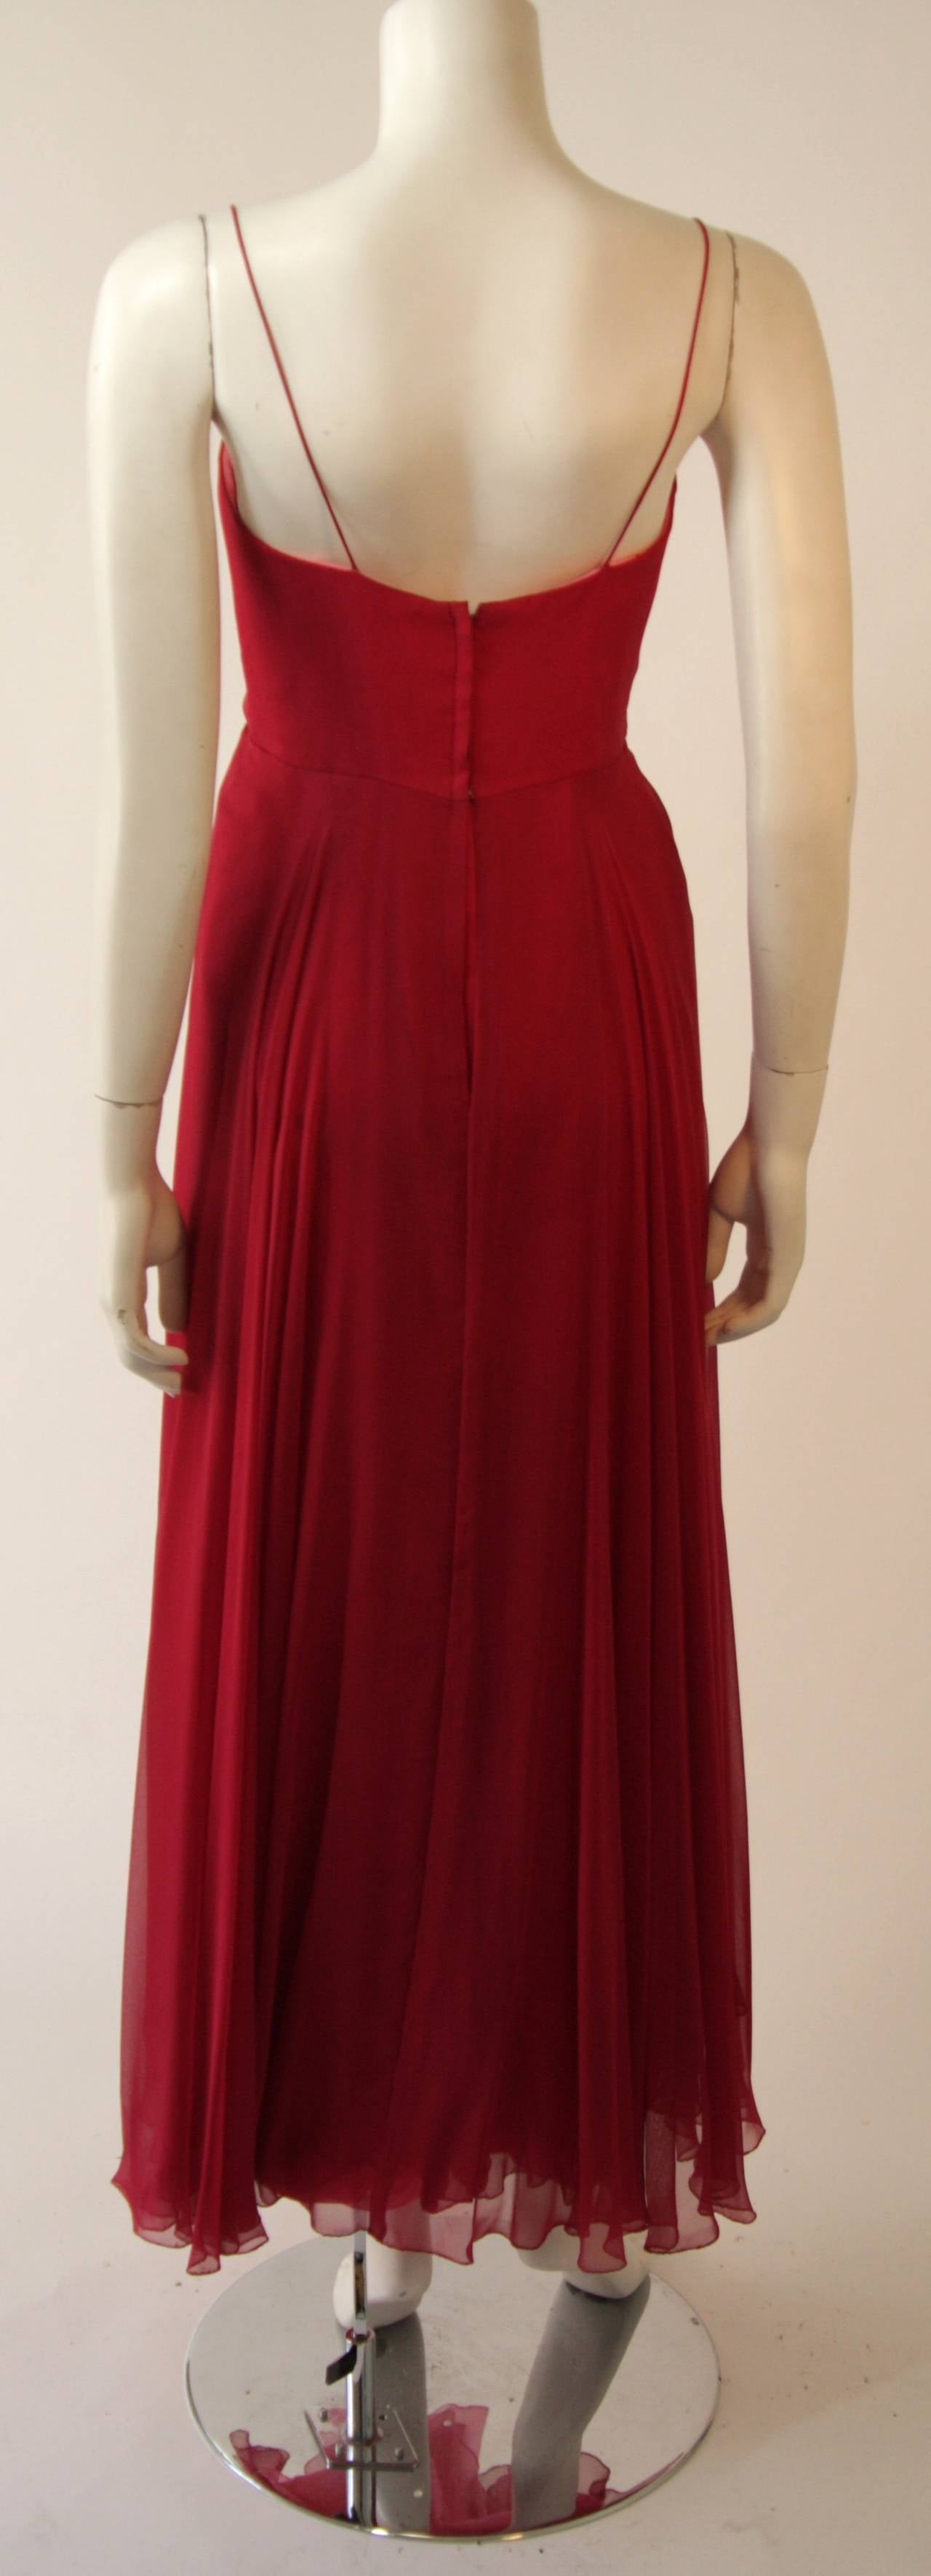 Myer Kahan Rose and Pink Chiffon Gown In Excellent Condition For Sale In Los Angeles, CA